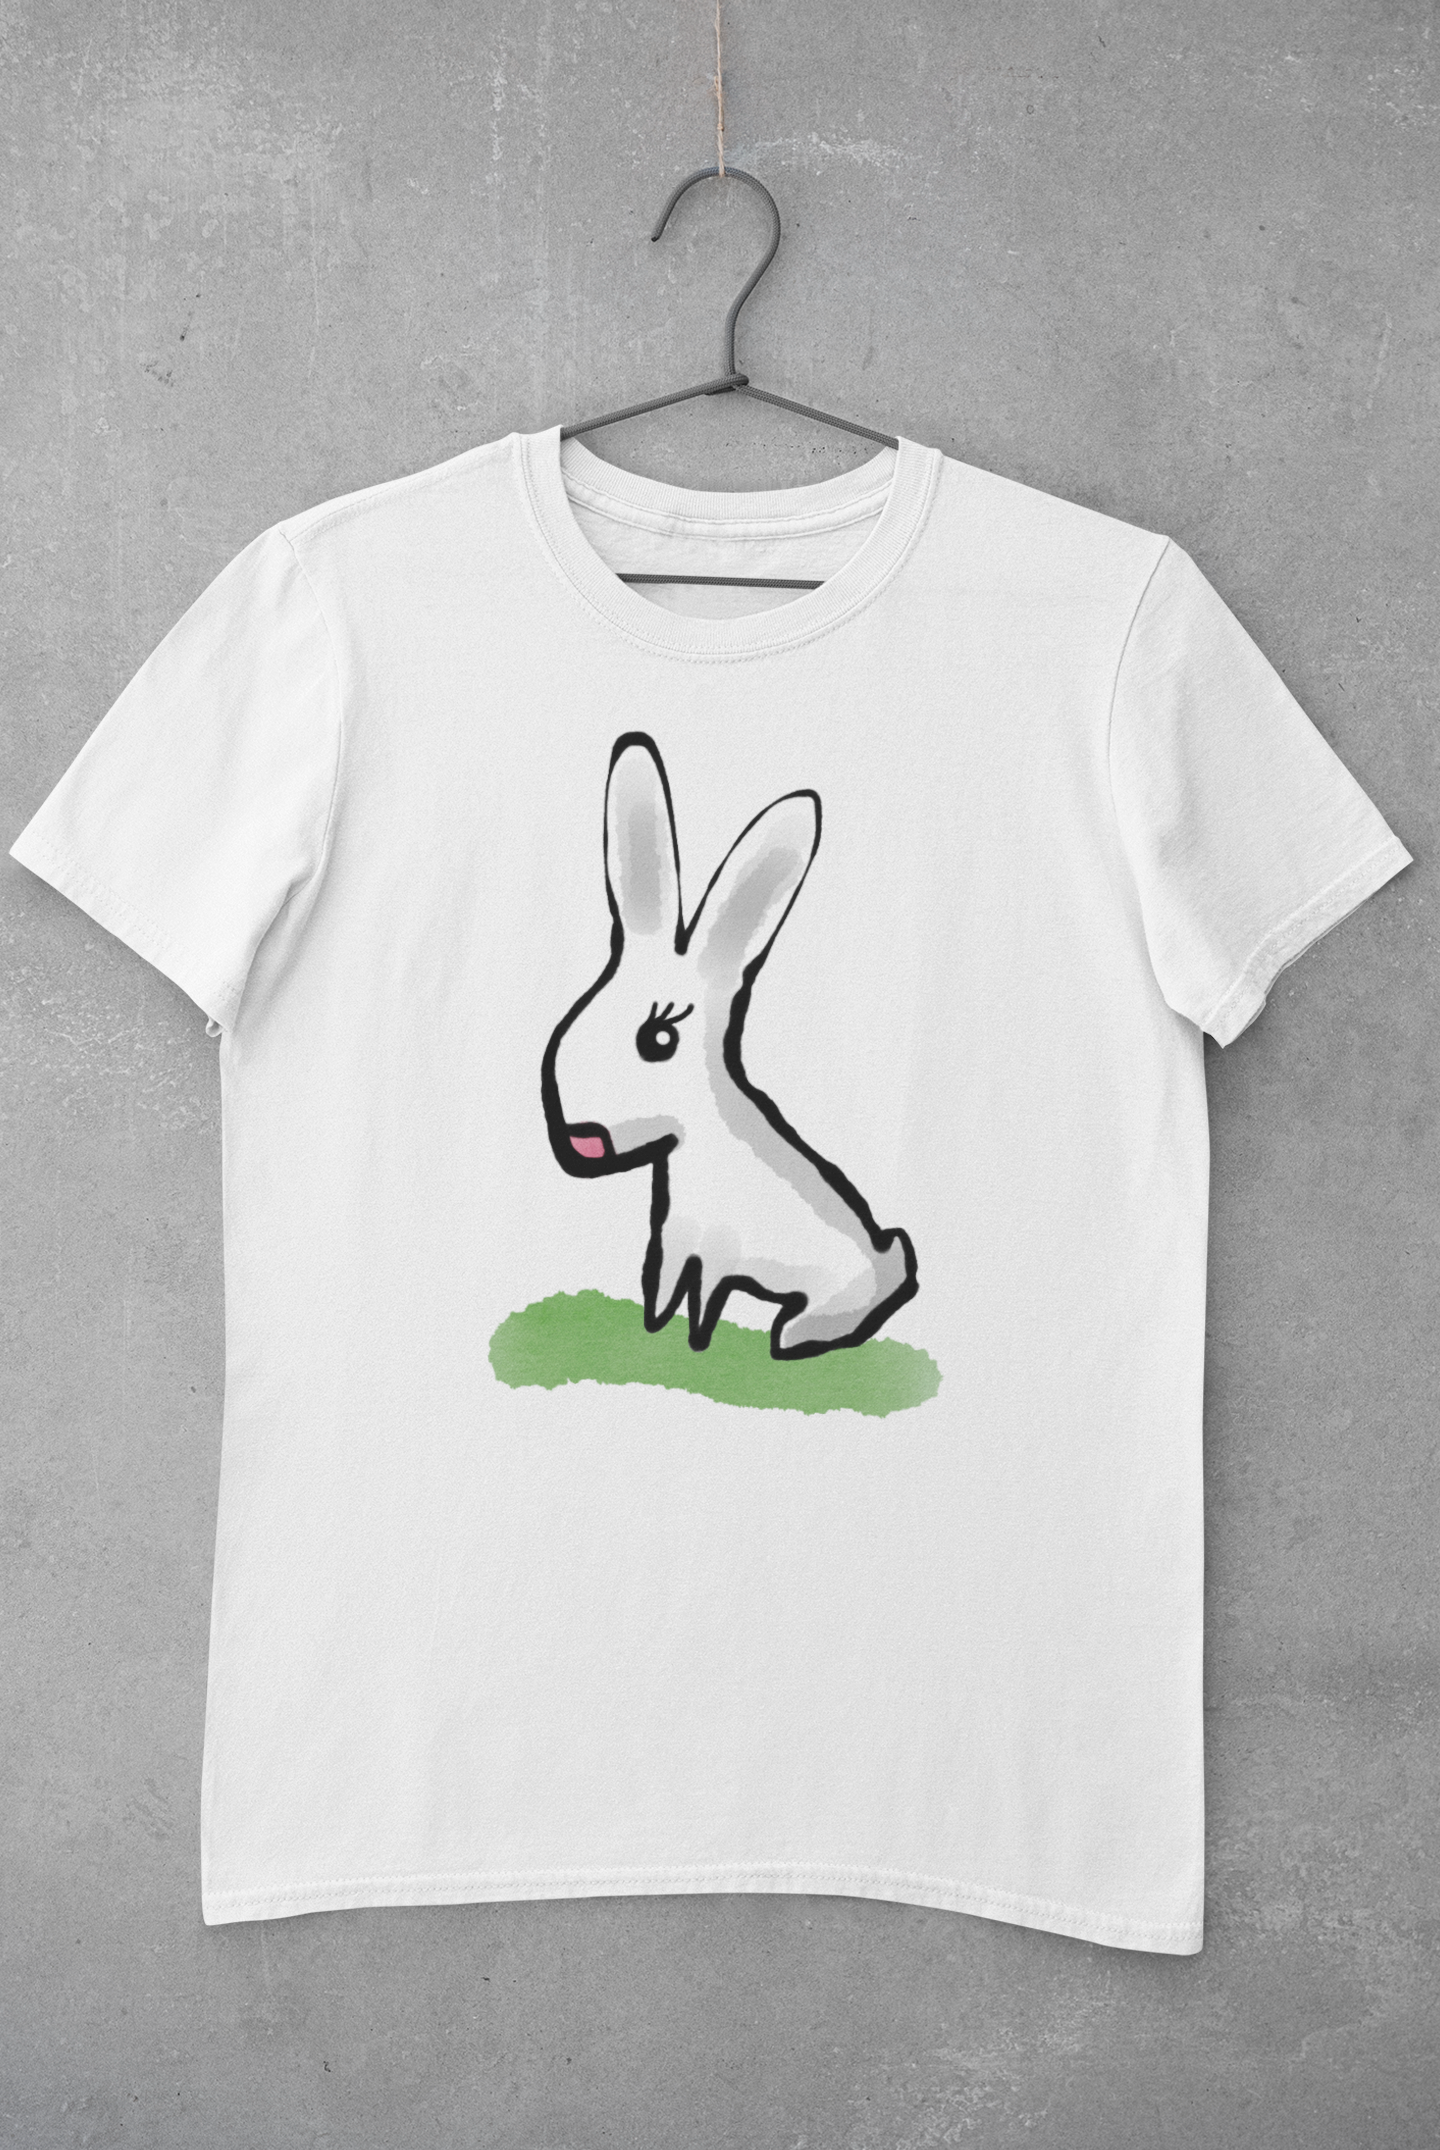 Cute Bunny T-shirt original illustrated design on white vegan cotton t-shirts by Hector and Bone